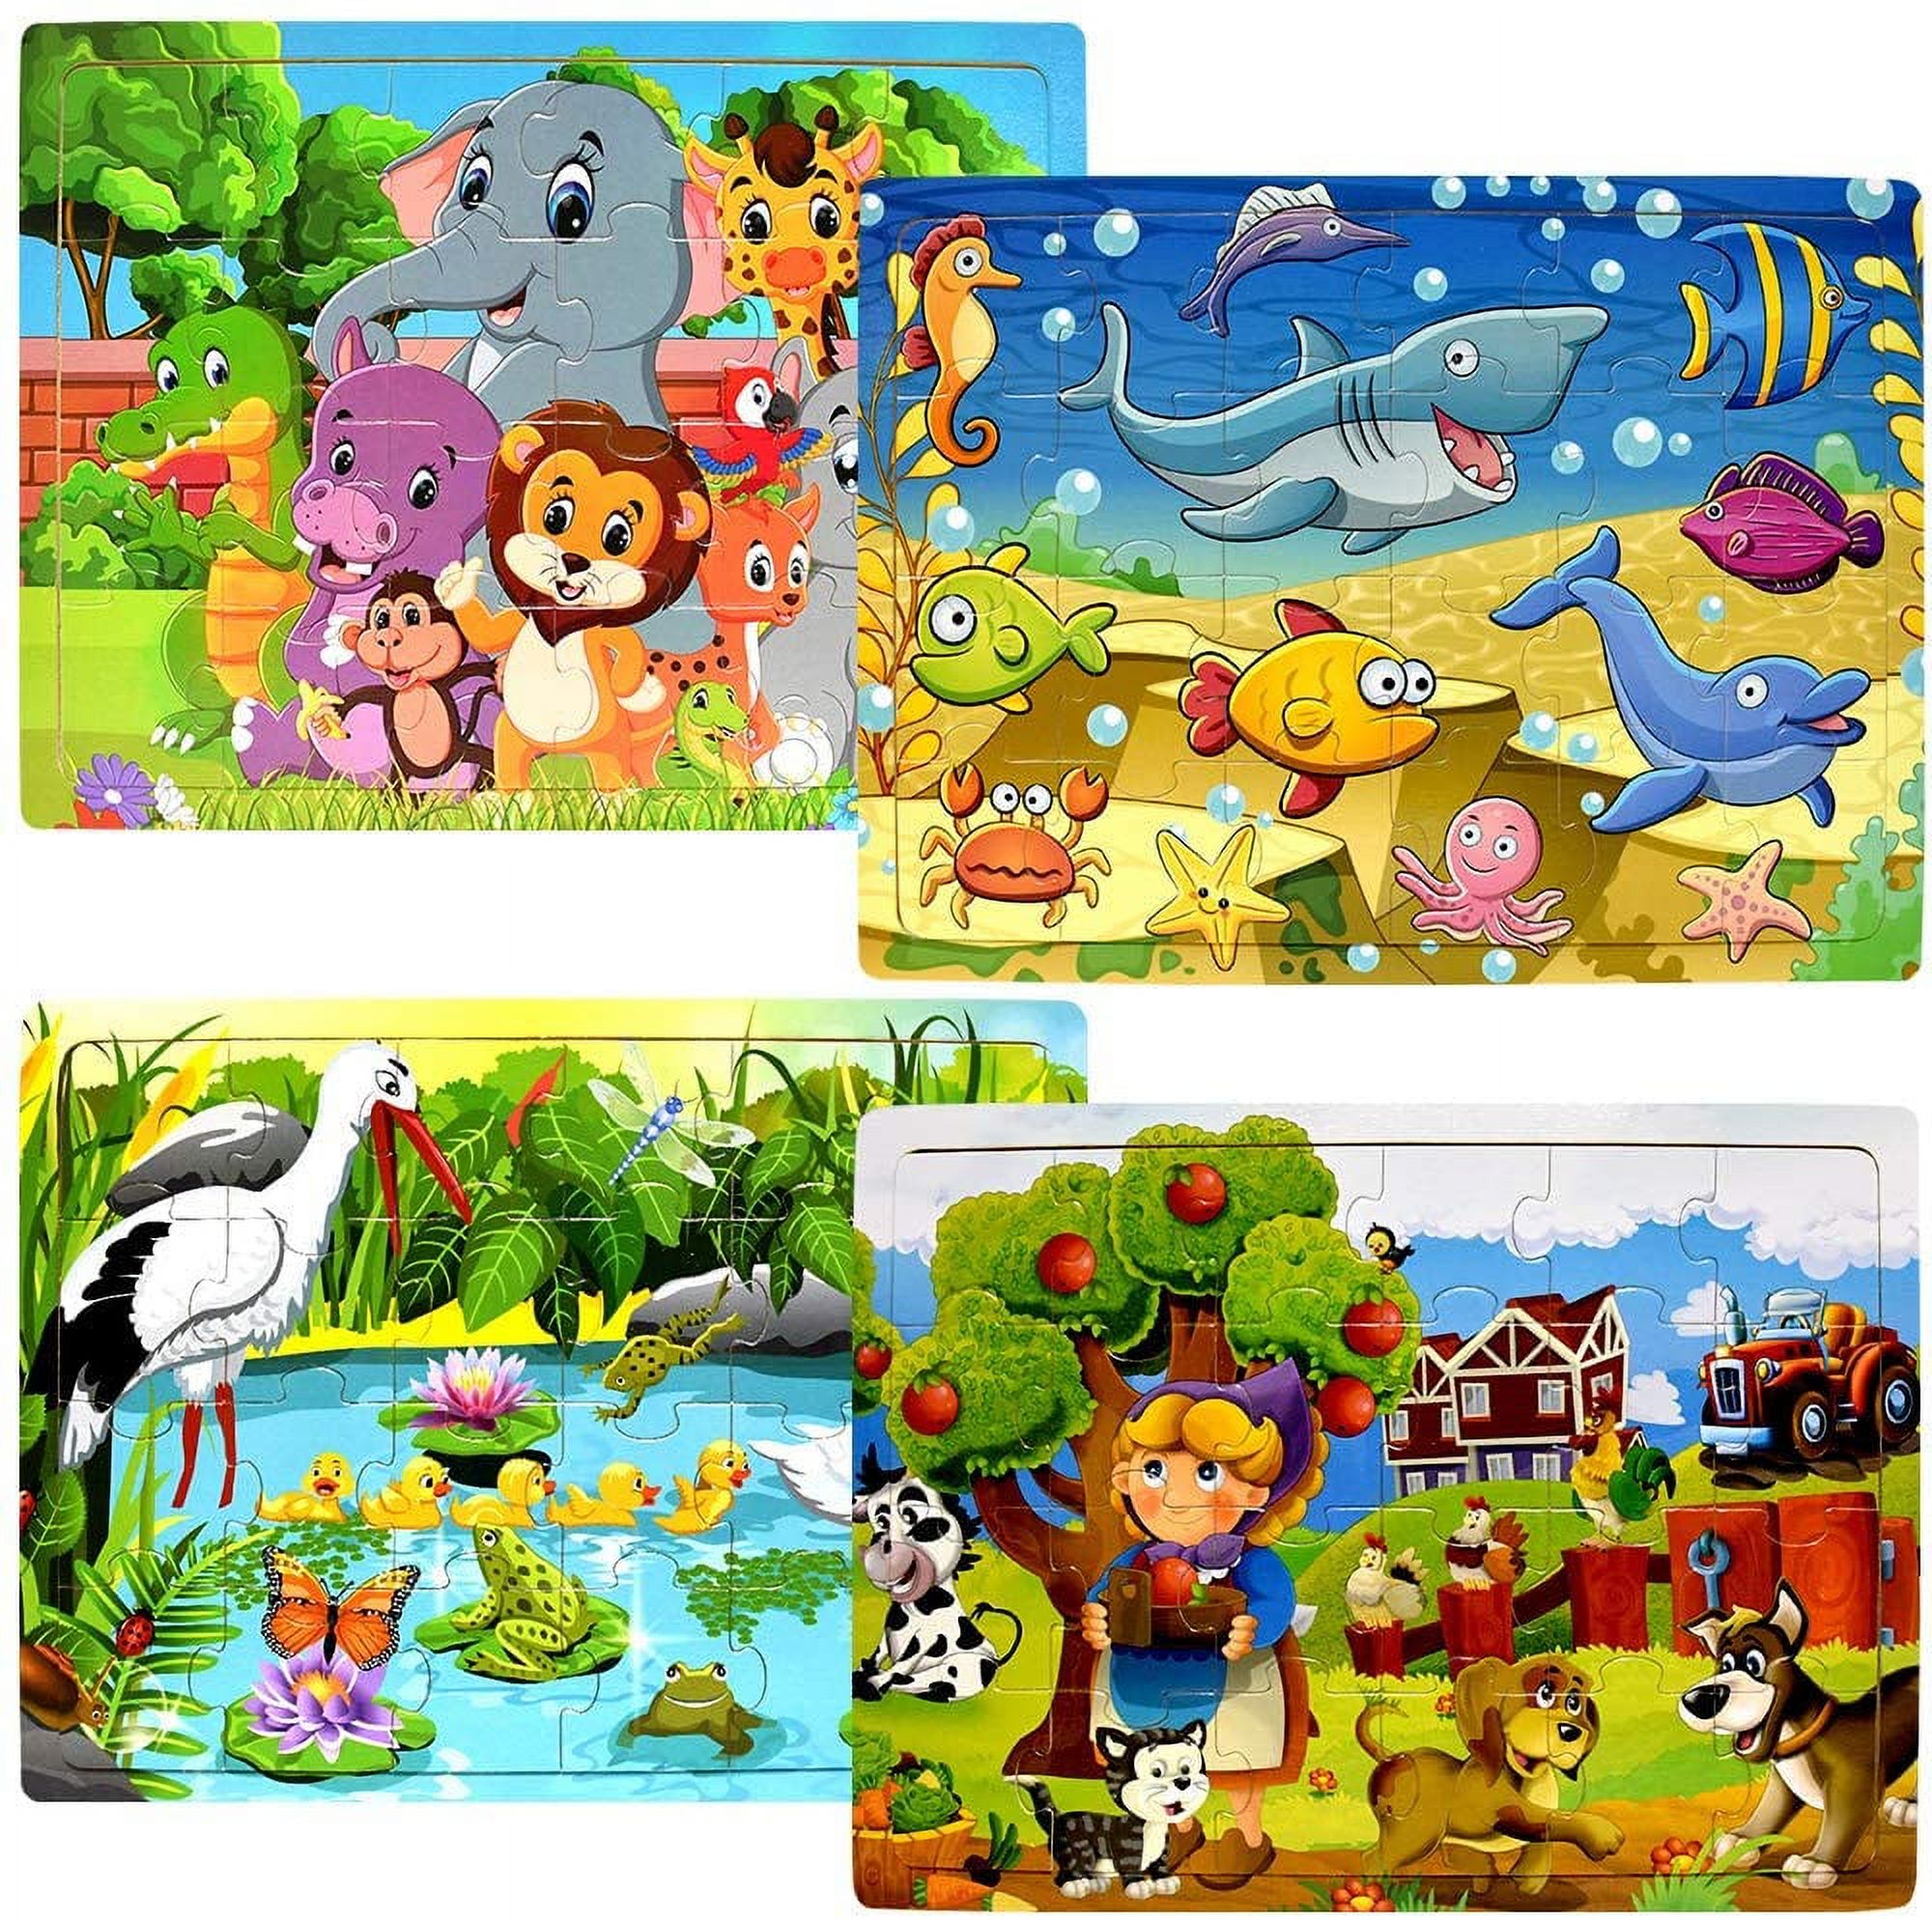 Wooden Puzzles for Kids Ages 2-5 - 24 Piece Puzzle for Toddlers Preschool Kids Jigsaw Puzzles - 4 Pack Vibrant Children Theme Learning Educational Puzzle Set for Kids 2 3 4 5 Year Old - image 1 of 7